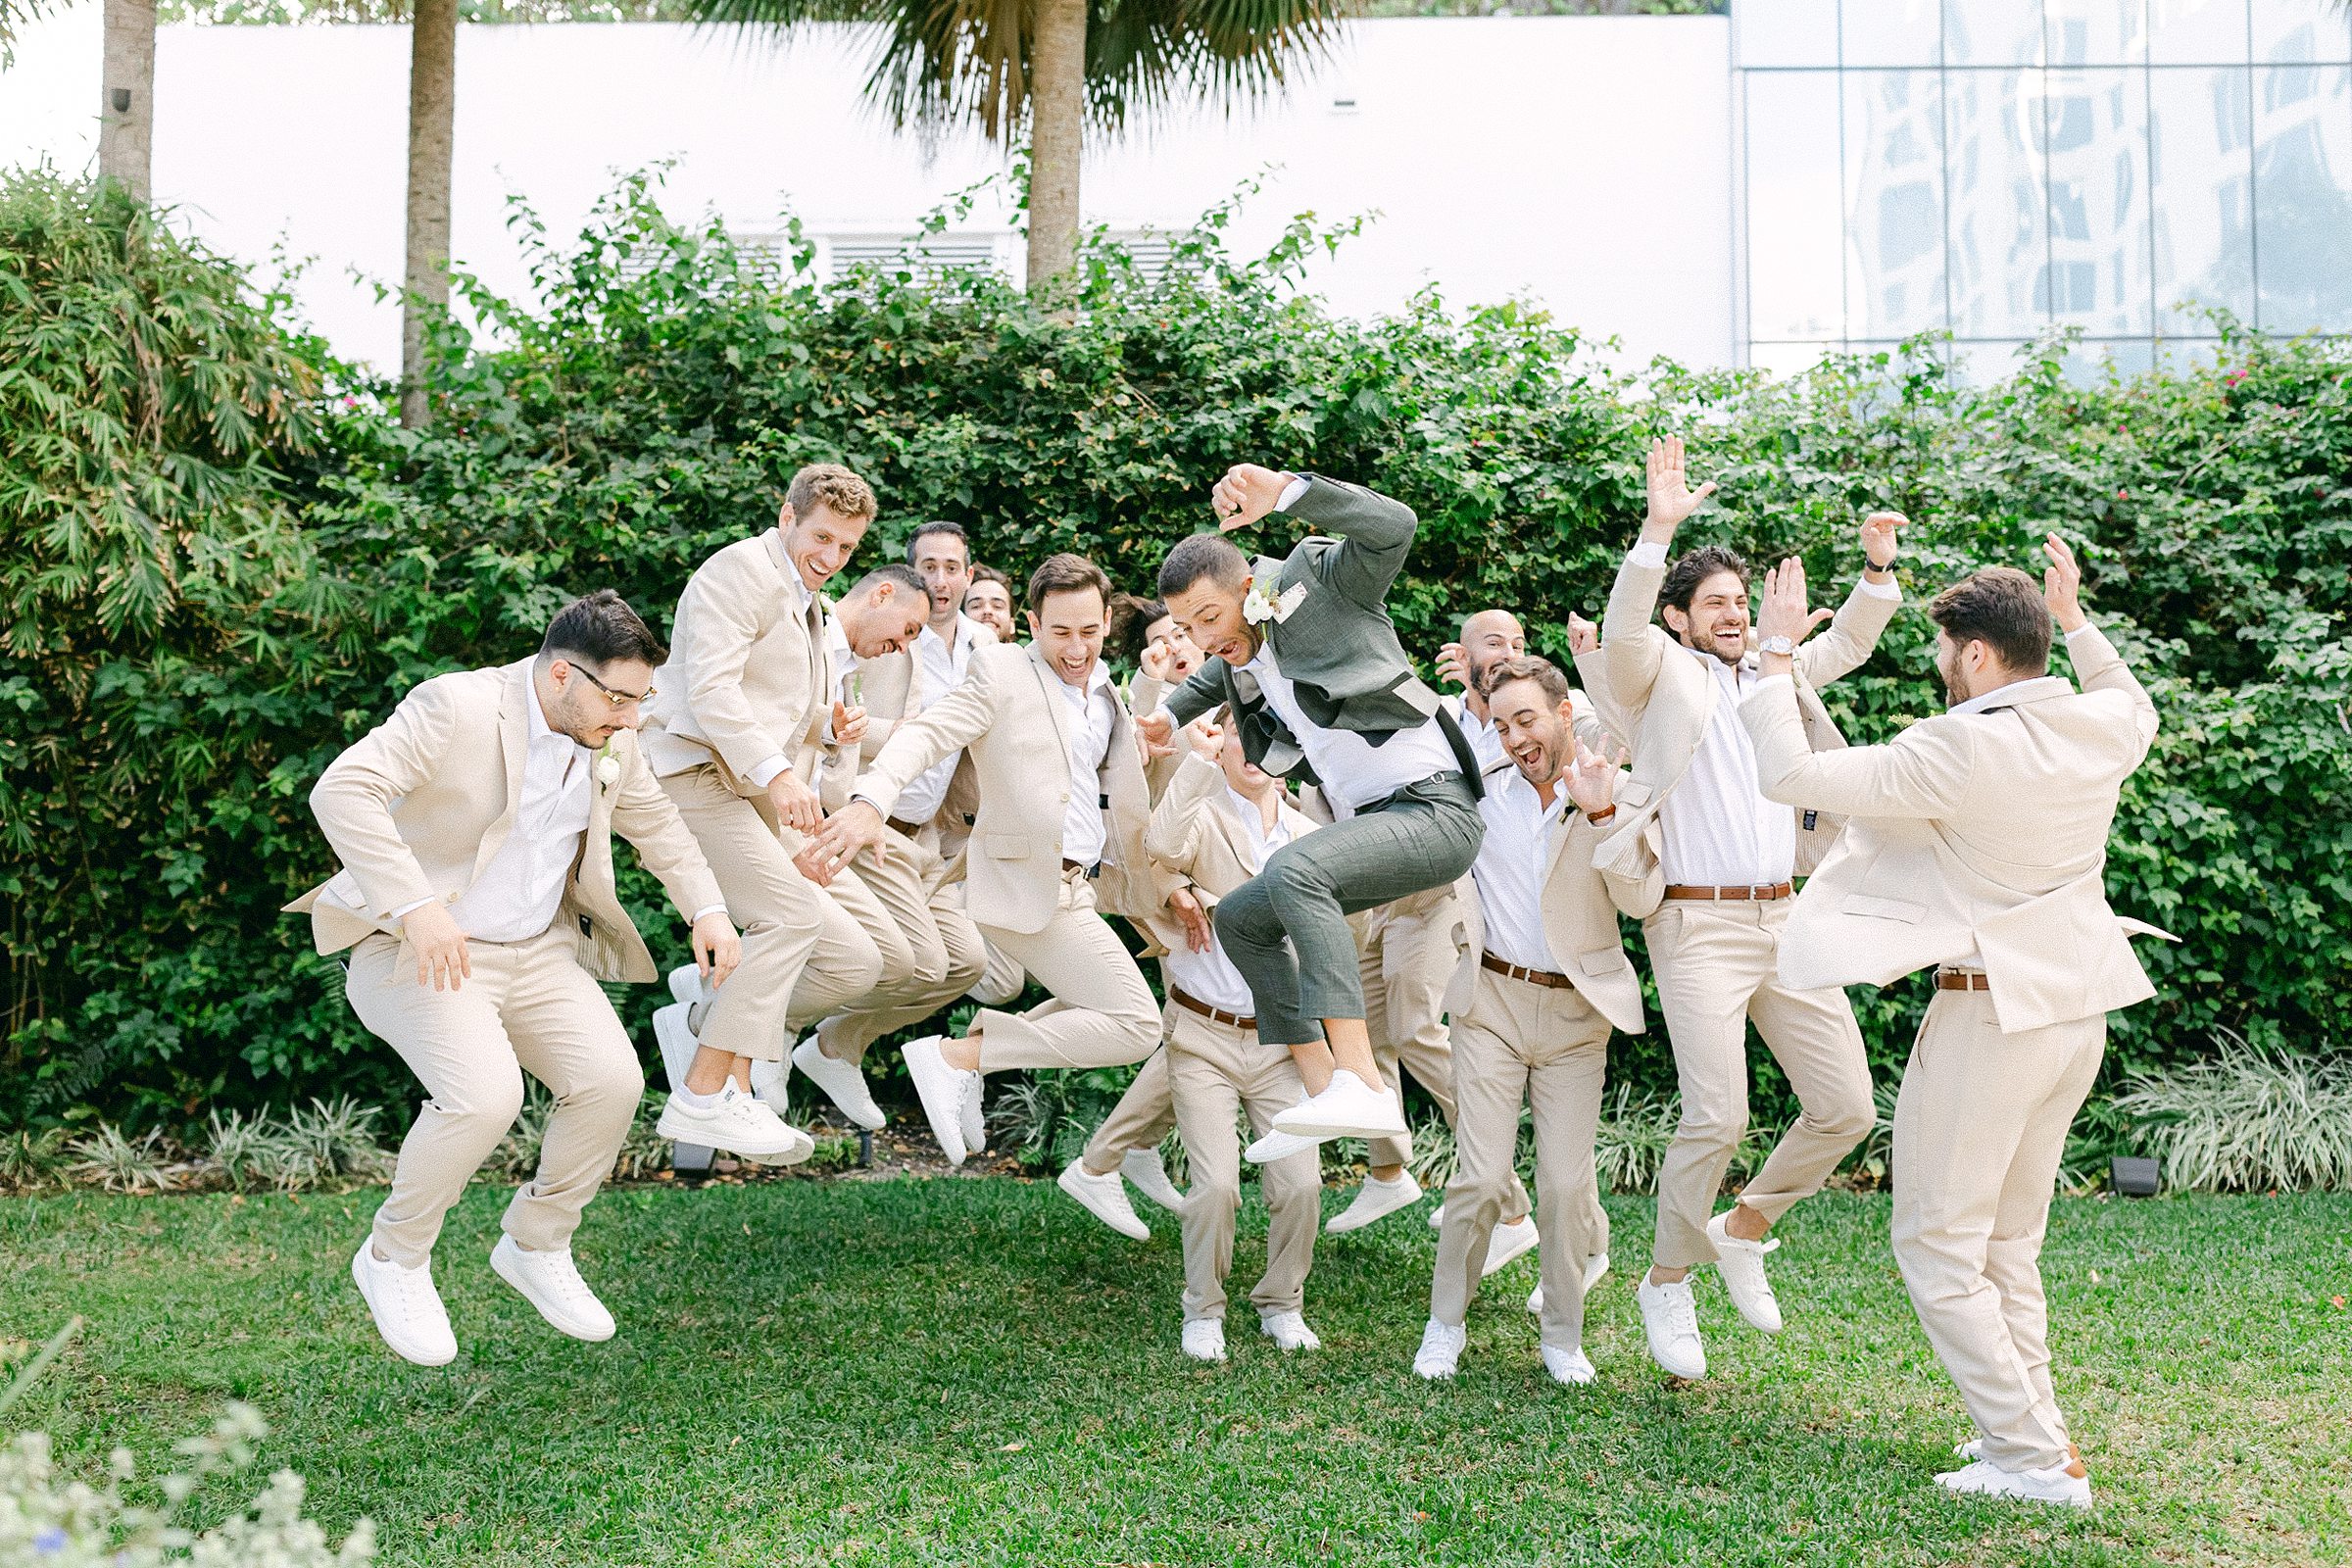 groomsmen group photo of them jumping in their tan suits